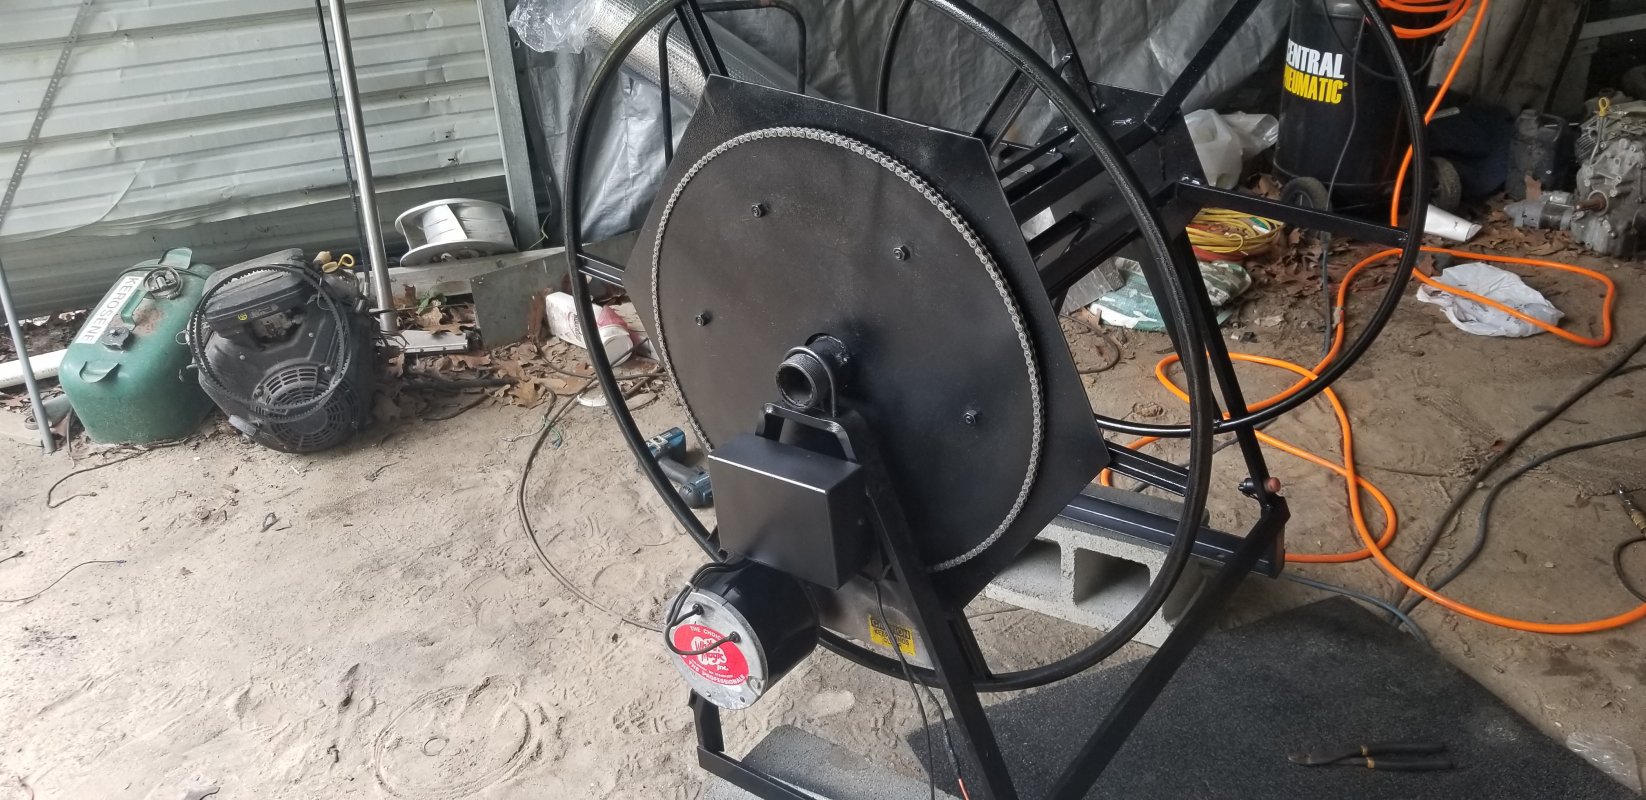 Electric hose reel With live vac. 300ft low profile white magic. Referbished new paint and new cha.